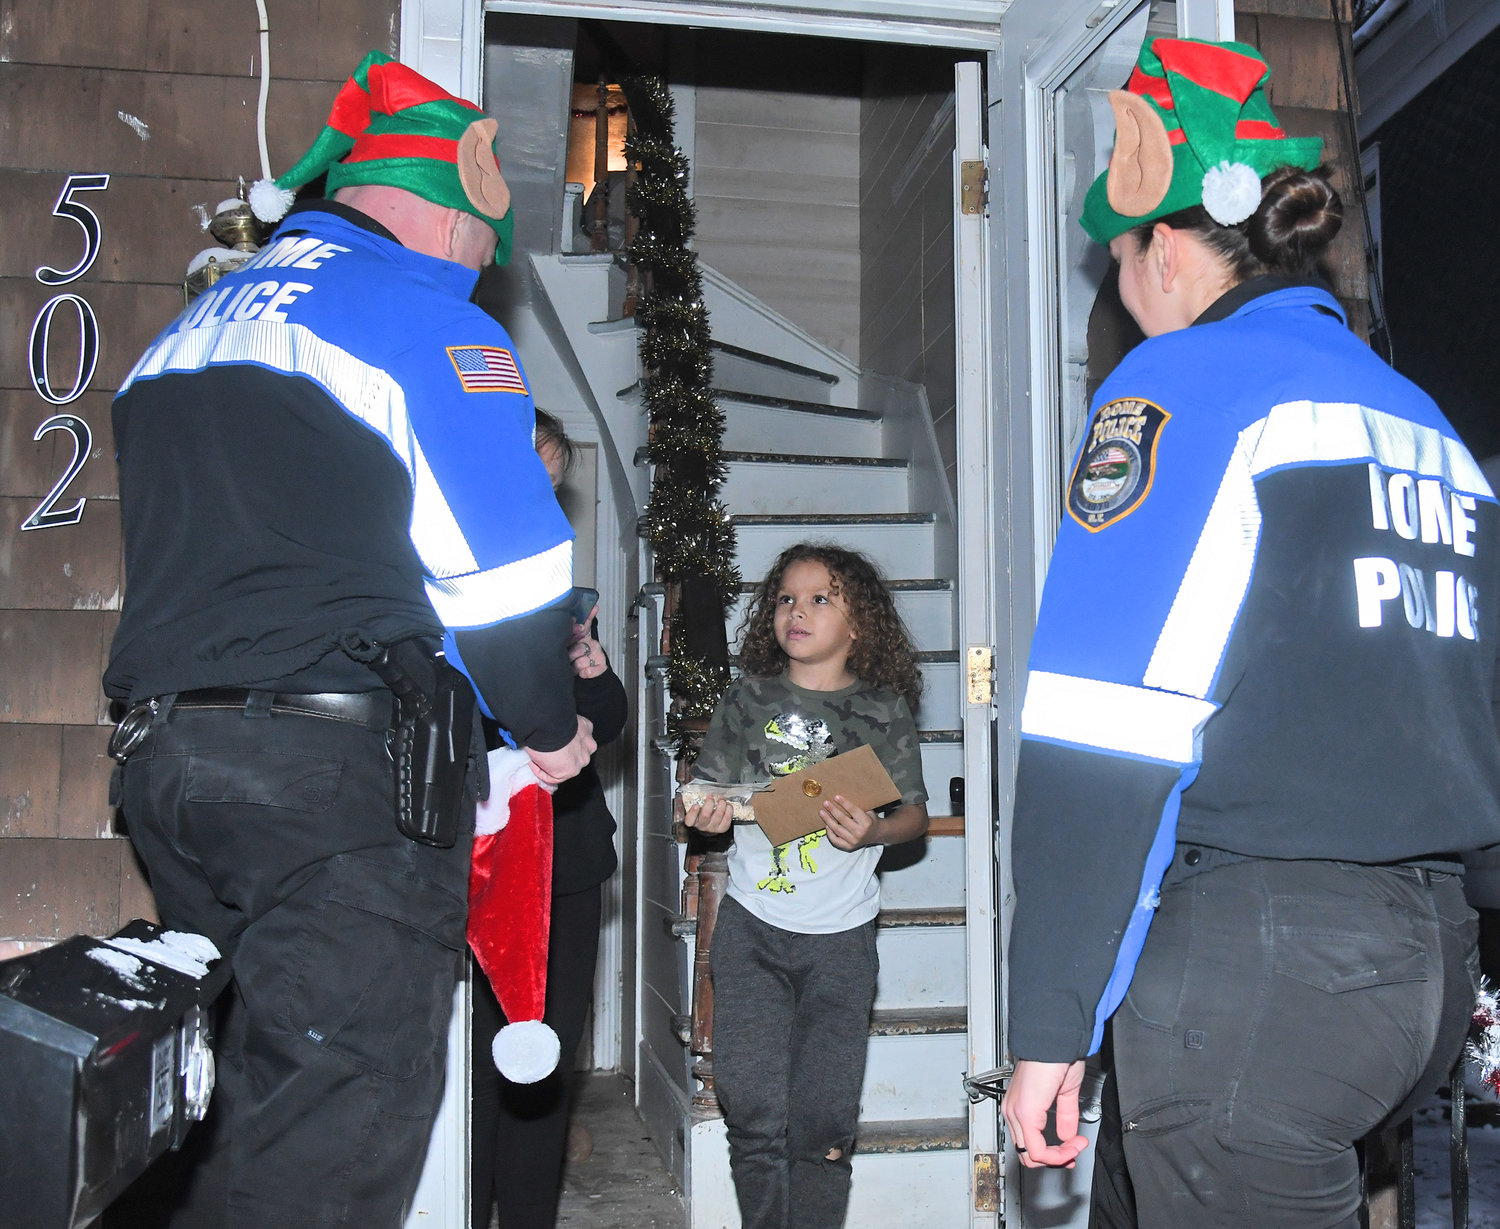 Niko Boyer, age 8, is all smiles during a visit from Rome Police officers Jenna Kiskiel and Anthony Calandra. Boyer had delivered his letter to Santa at the Rome Police station this year, and the officers dropped off Santa's response. Boyer was joined by his grandmother, Mary Boyer.